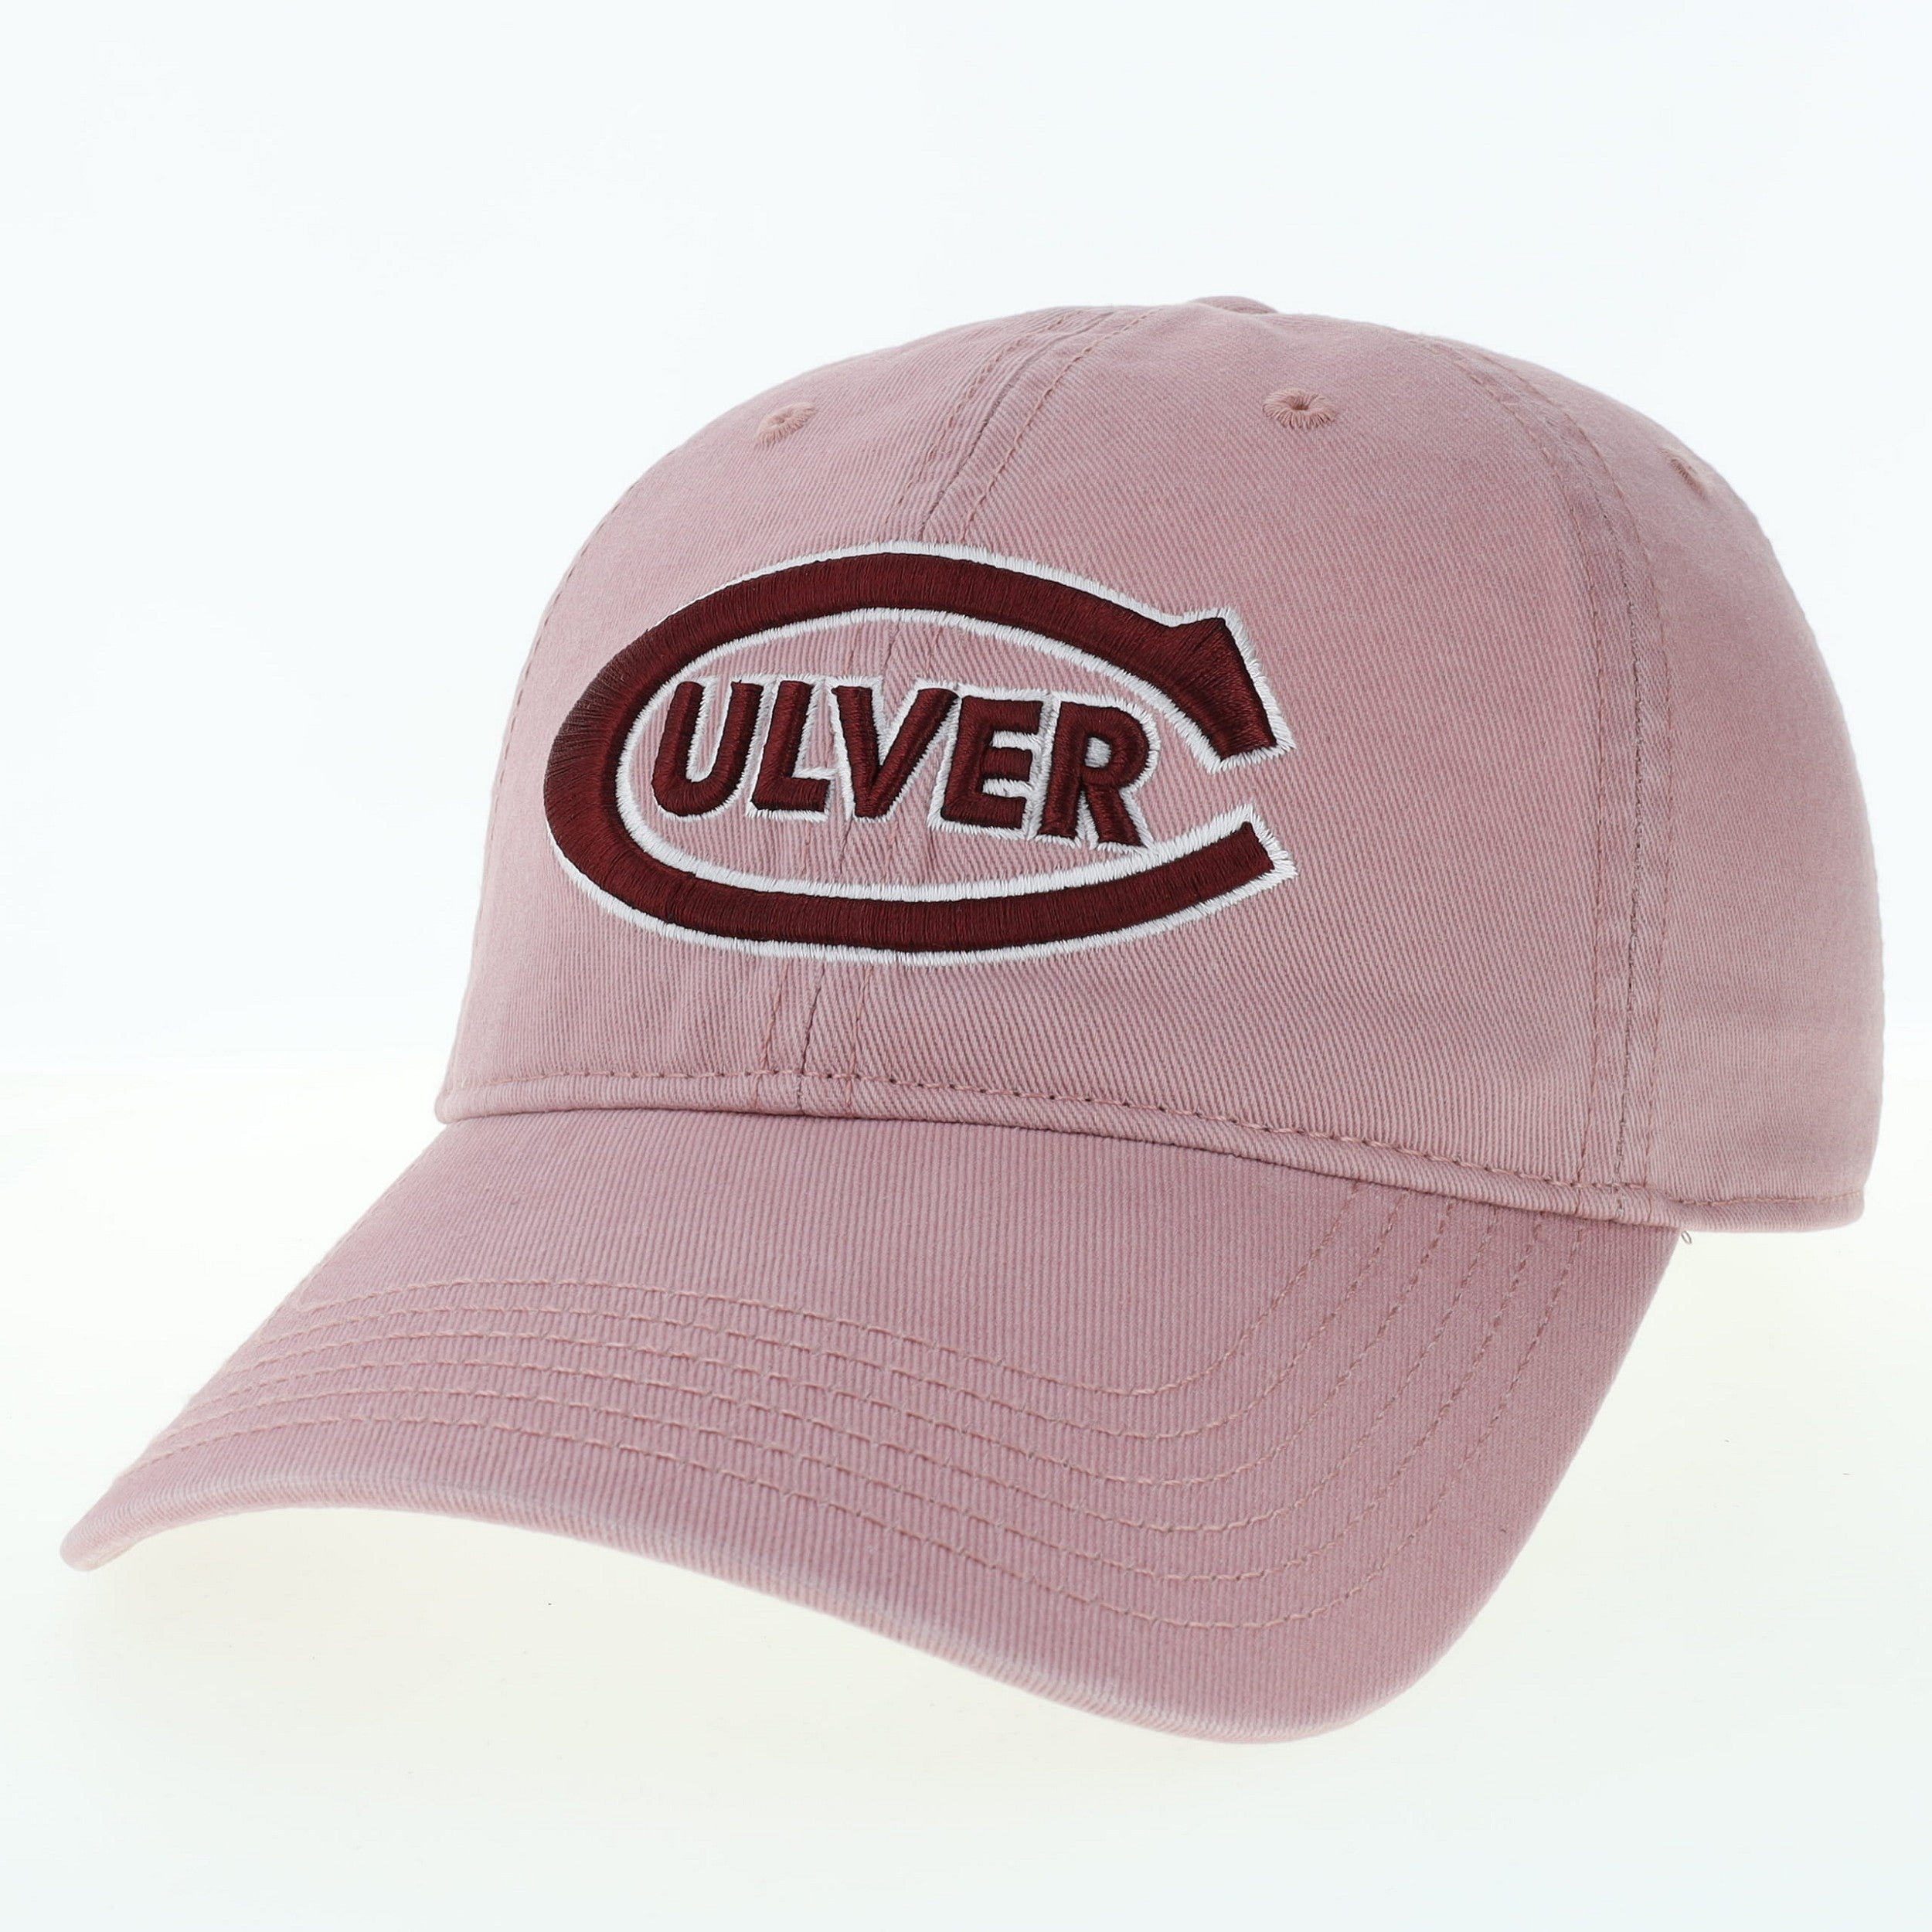 Culver-C Relaxed Twill Adjustable Hat - Dusty Rose